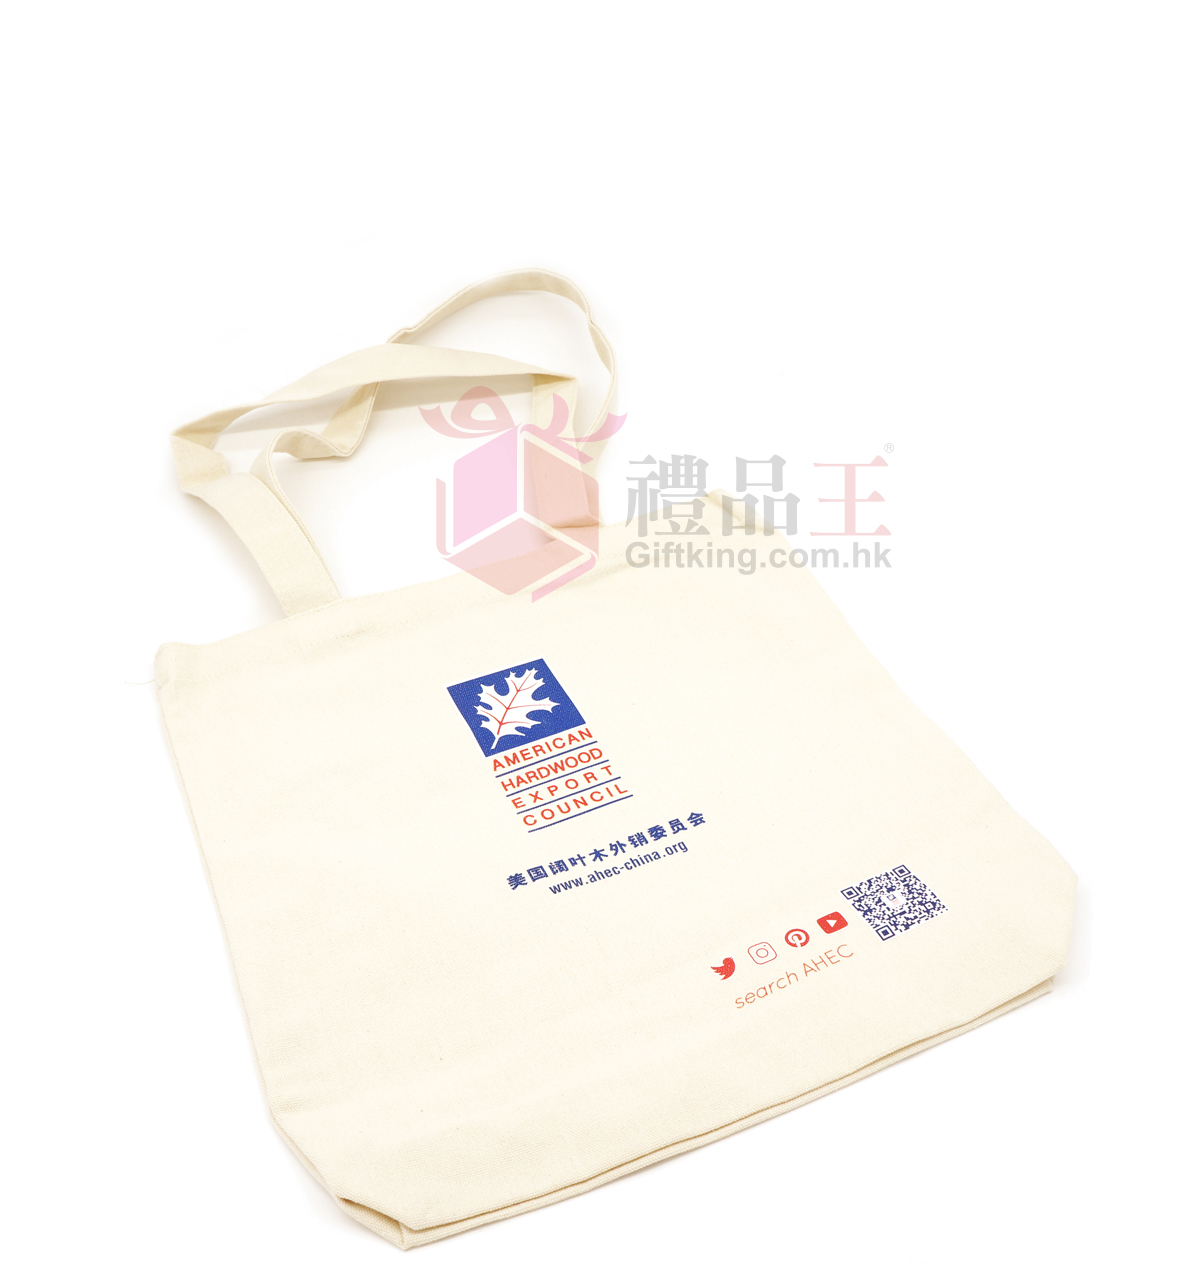 American Hardwood Export Council canvas bag (Advertising Gift)